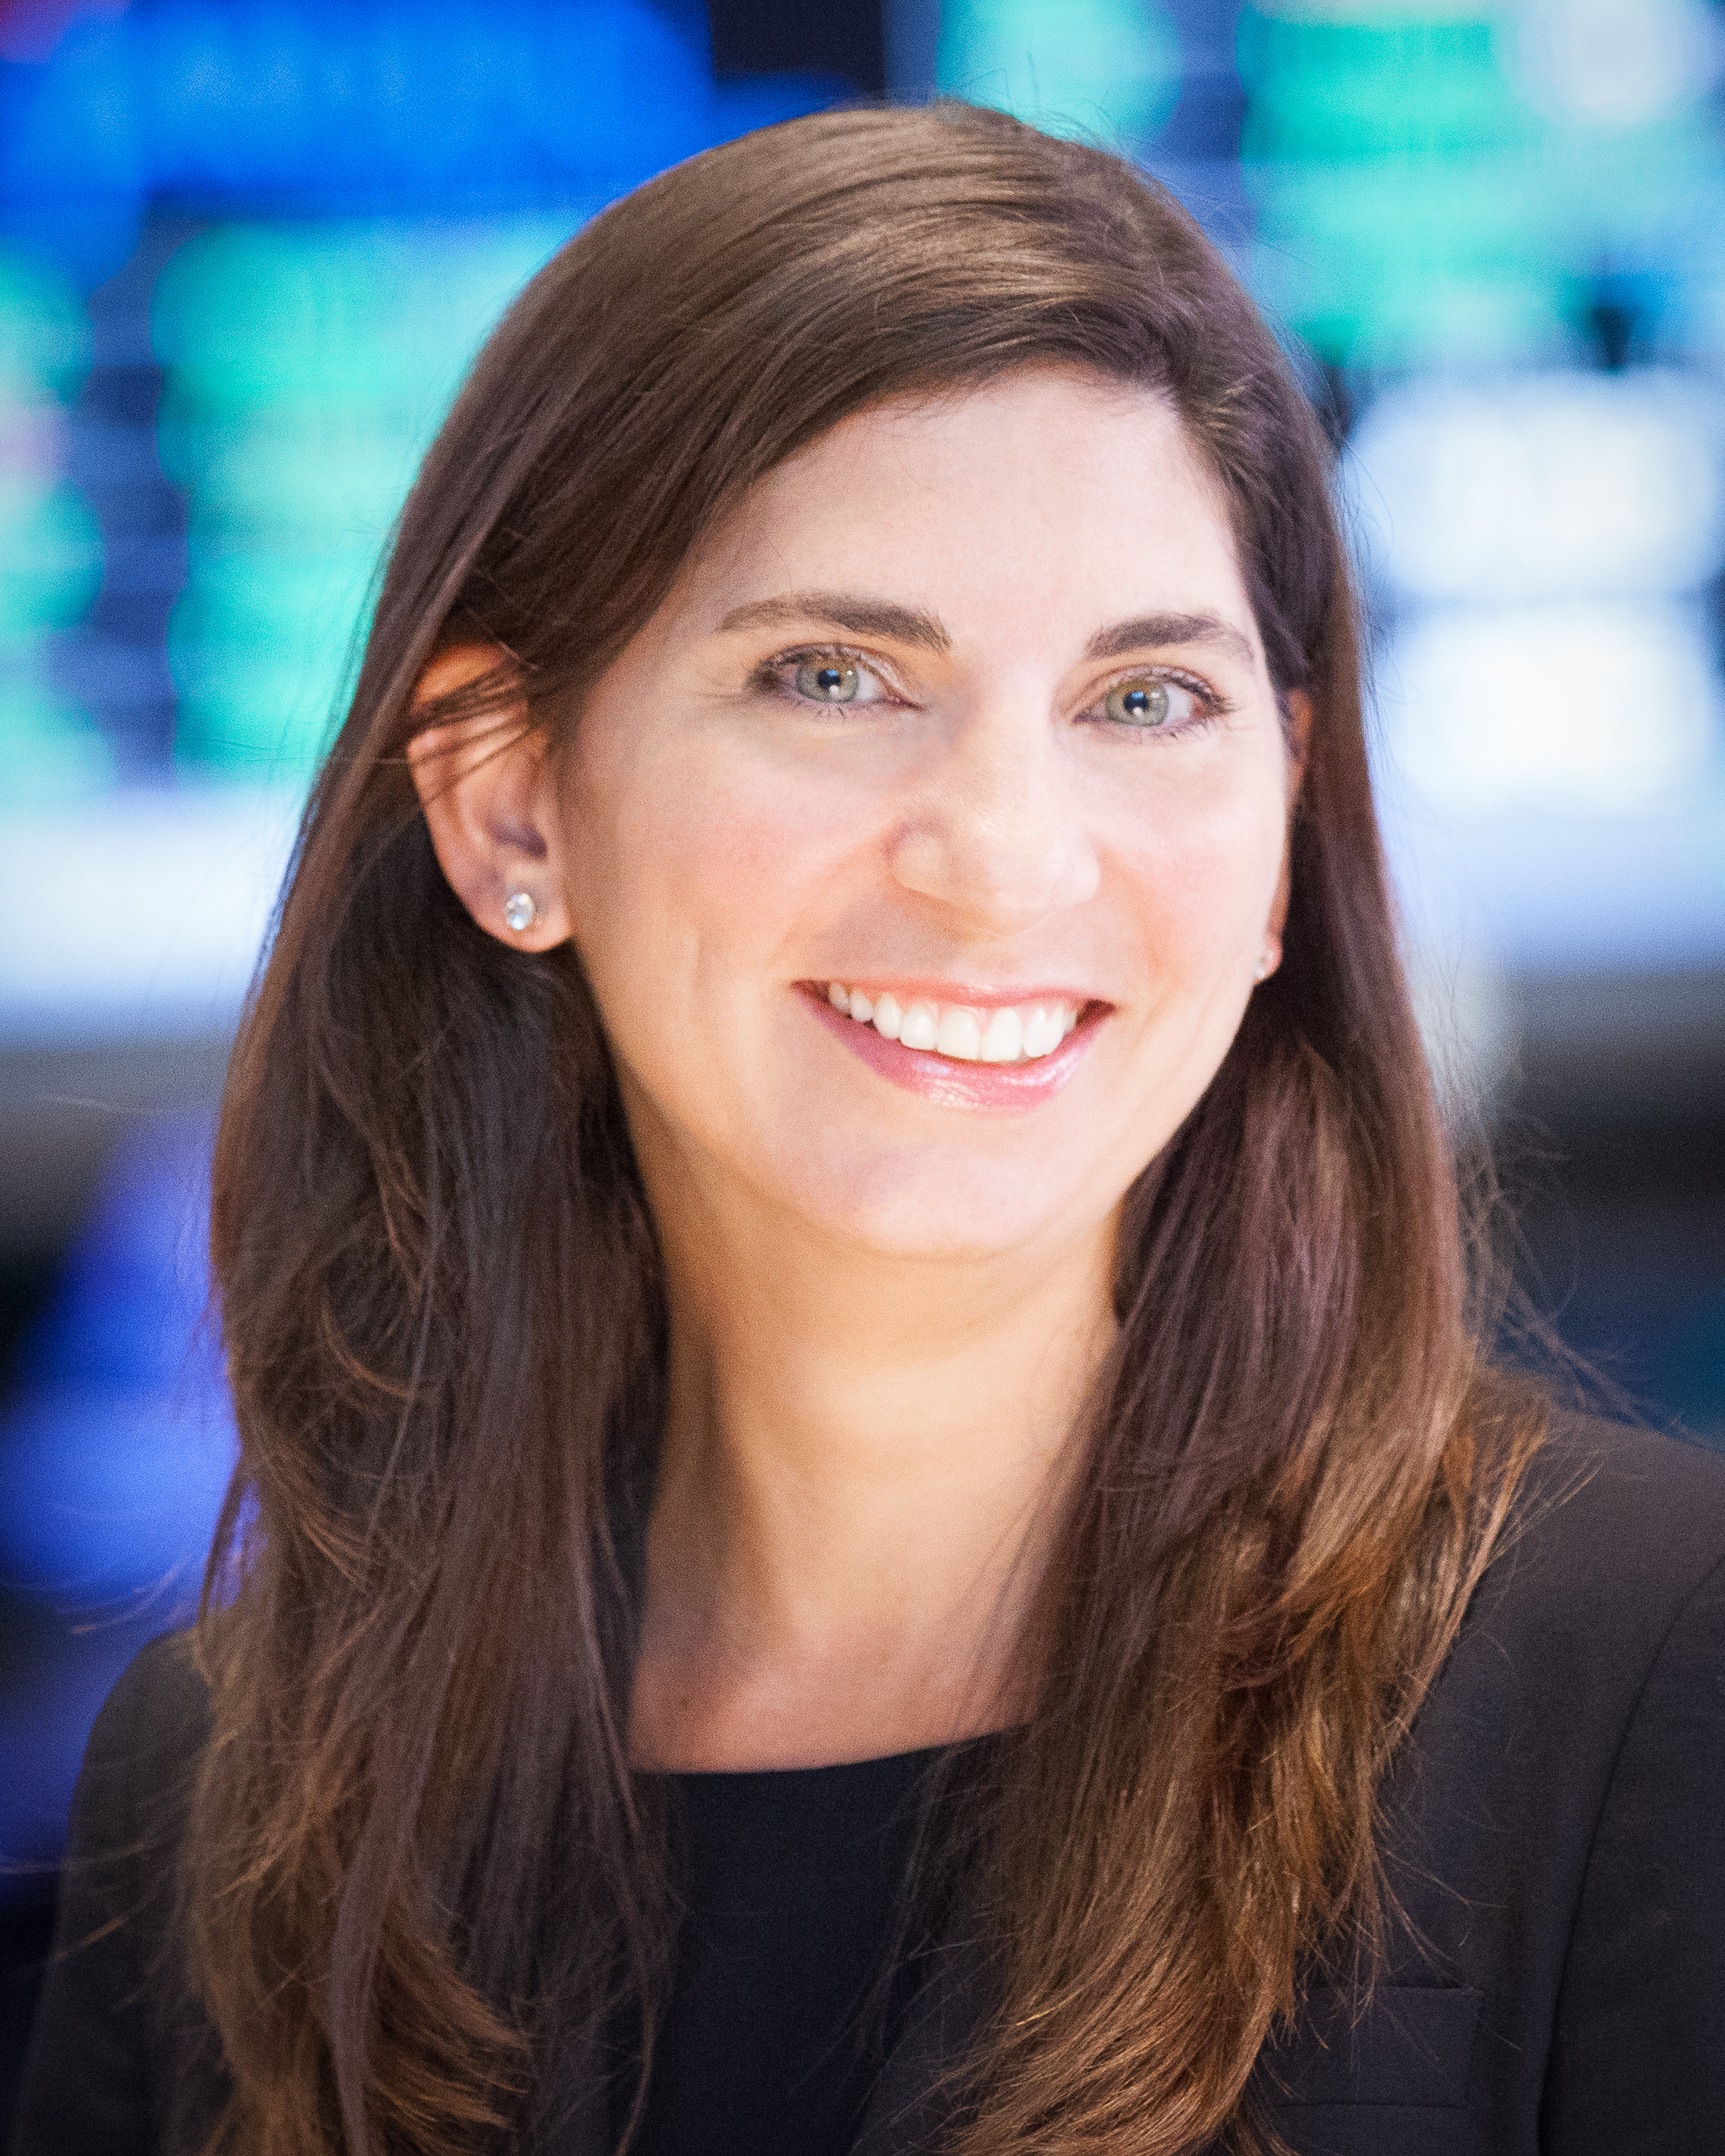 New York Stock Exchange President Stacey Cunningham will speak at a National Press Club in-person Headliners Luncheon on Wednesday, Oct. 6.